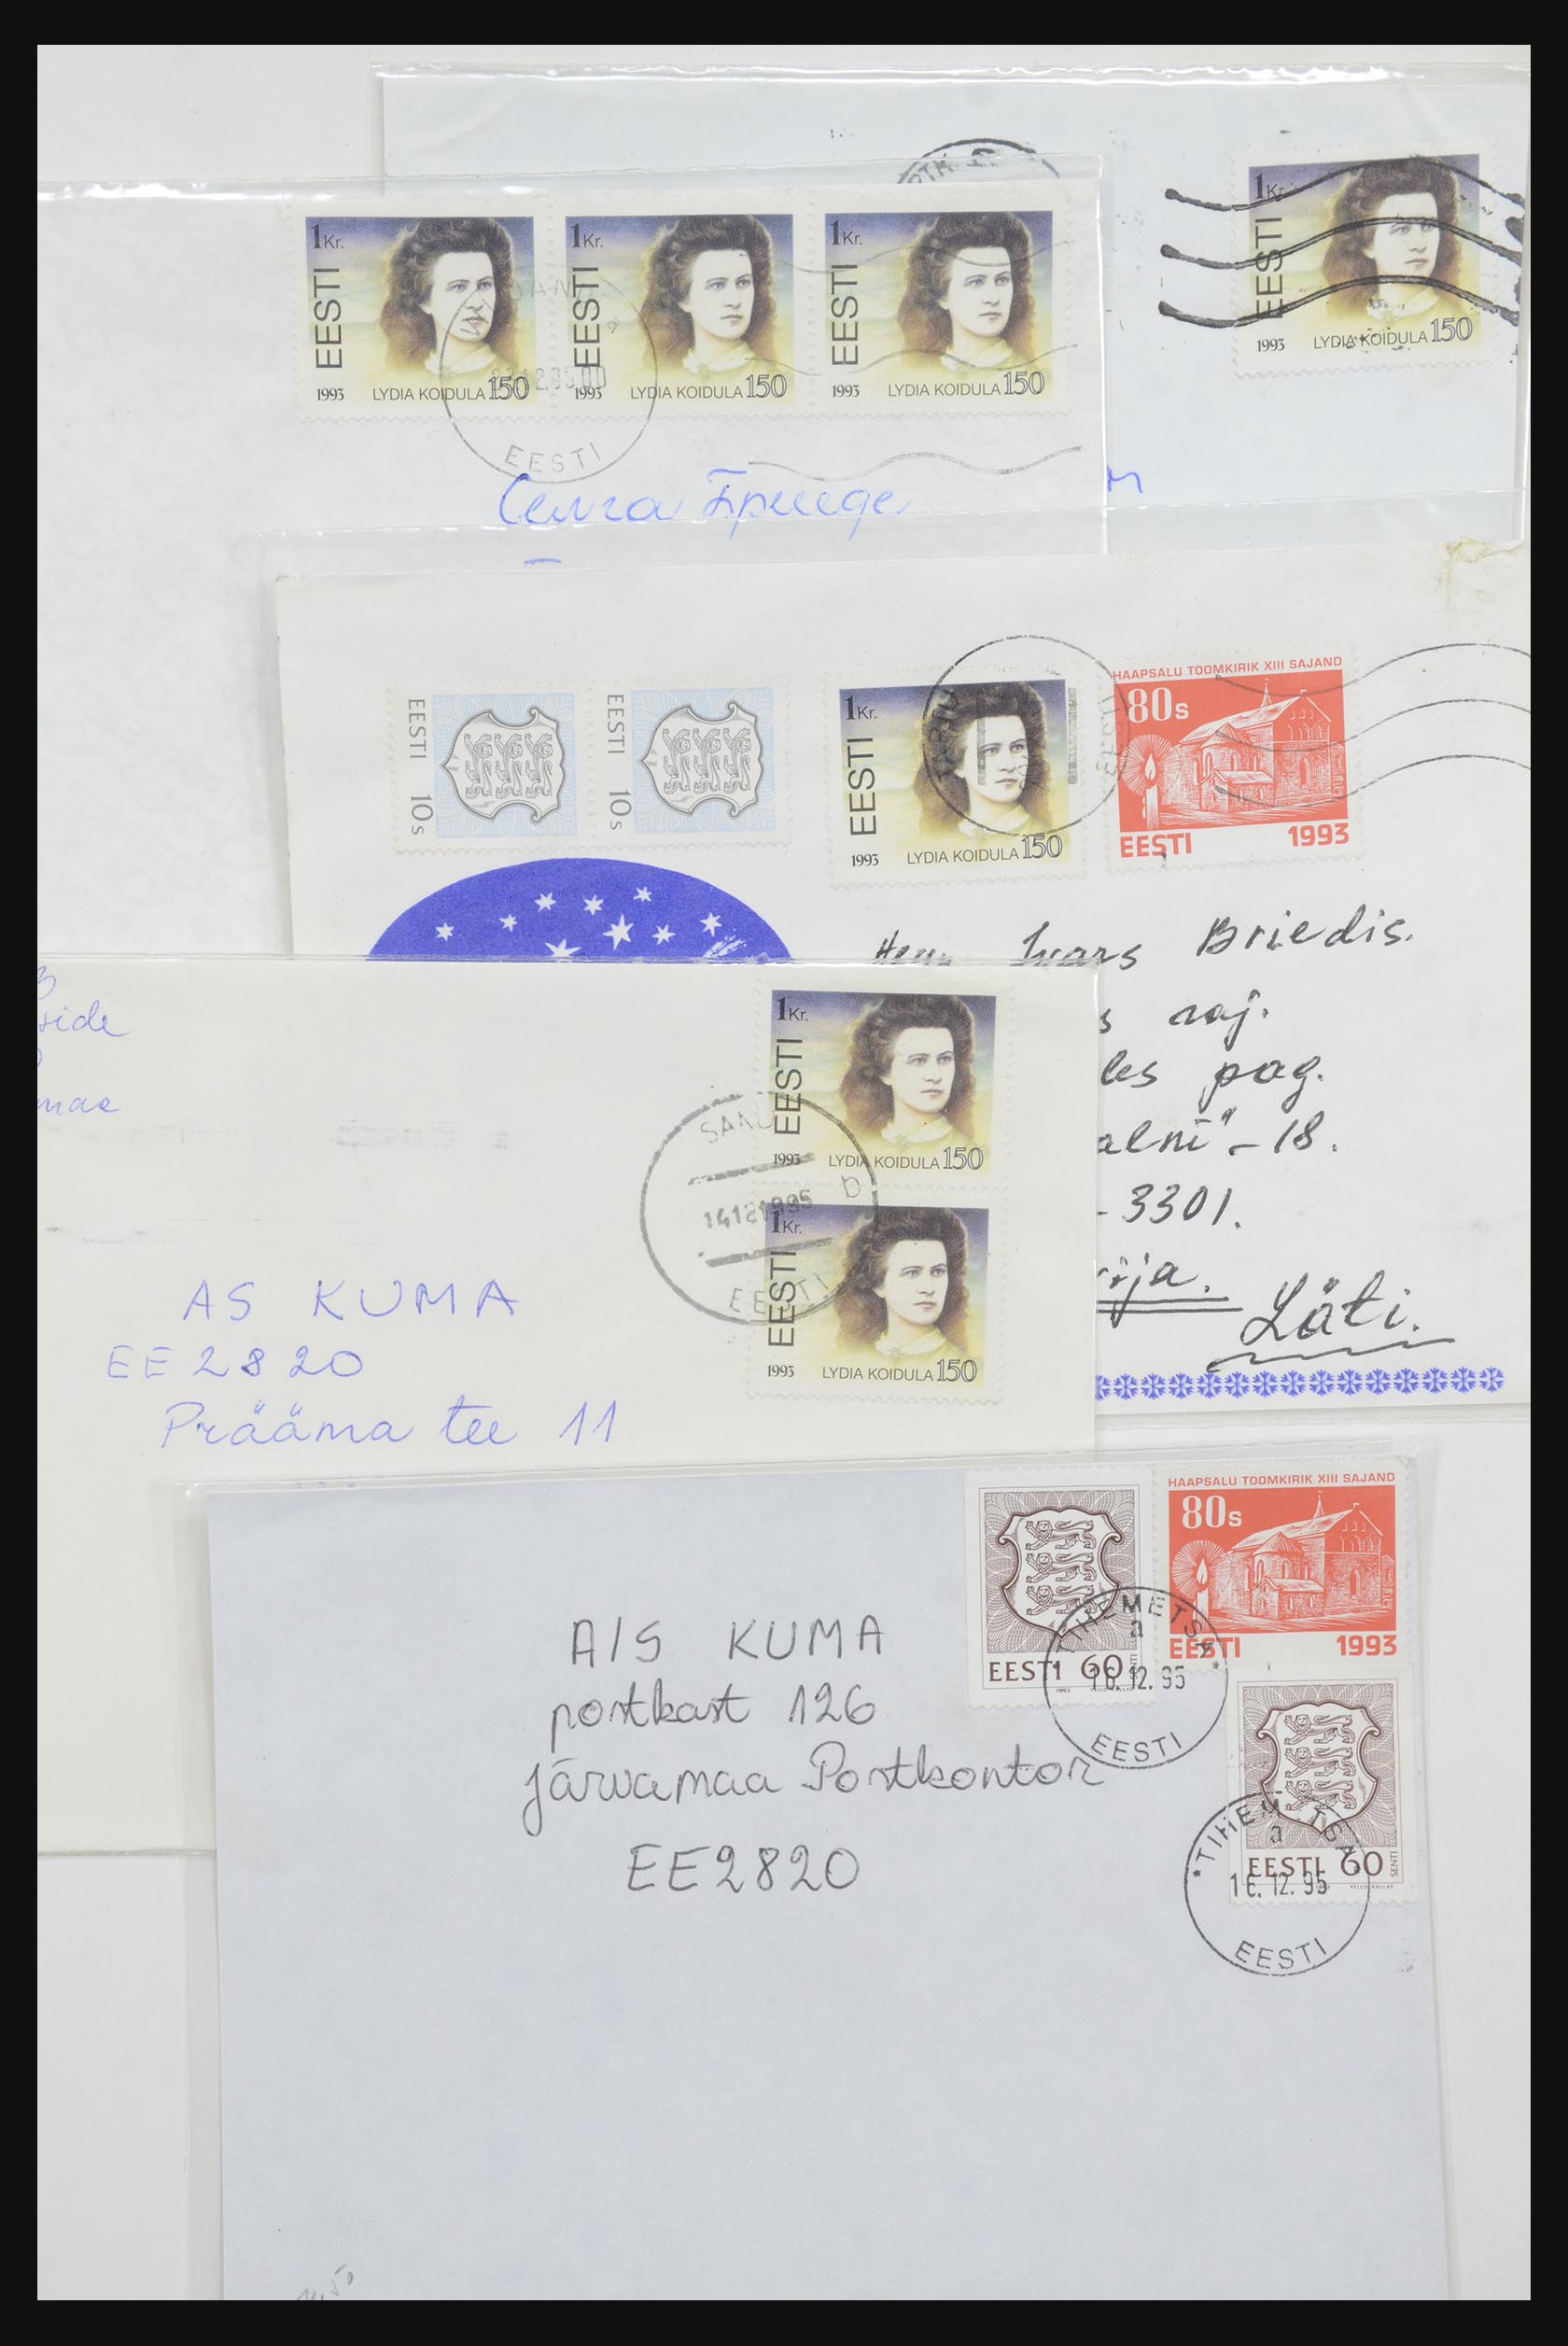 31928 1728 - 31928 Eastern Europe covers 1960's-1990's.